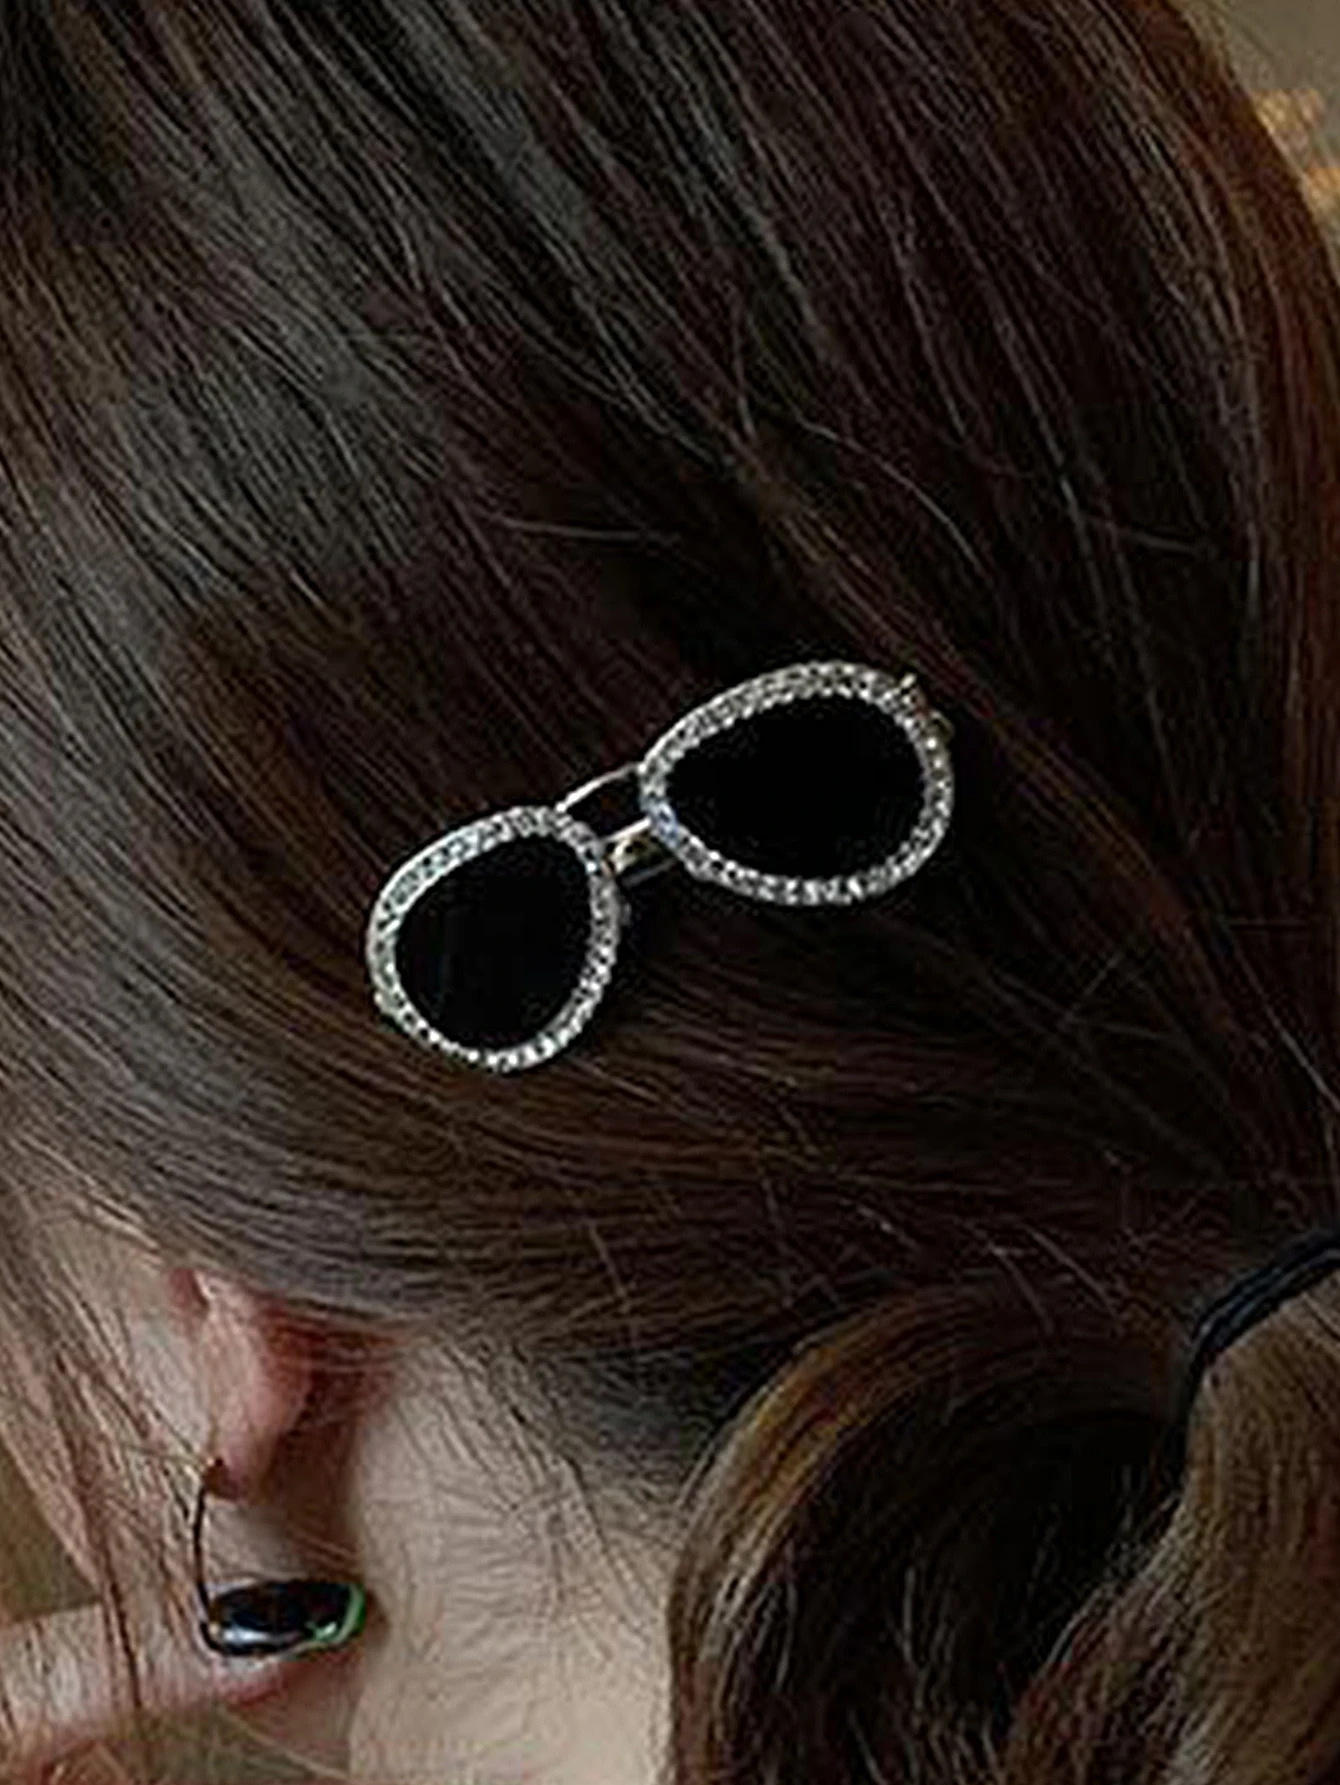 Hair Clip Cute Silver Glasses Claw Clip Small Rhinestone Hair Clip Metal Hair Supplies Korean Hair Accessories for Women Girls 50 pcs plant flowers stickers decorative adhesive diy stationery stickers scrapbooking accessories hand made craft supplies